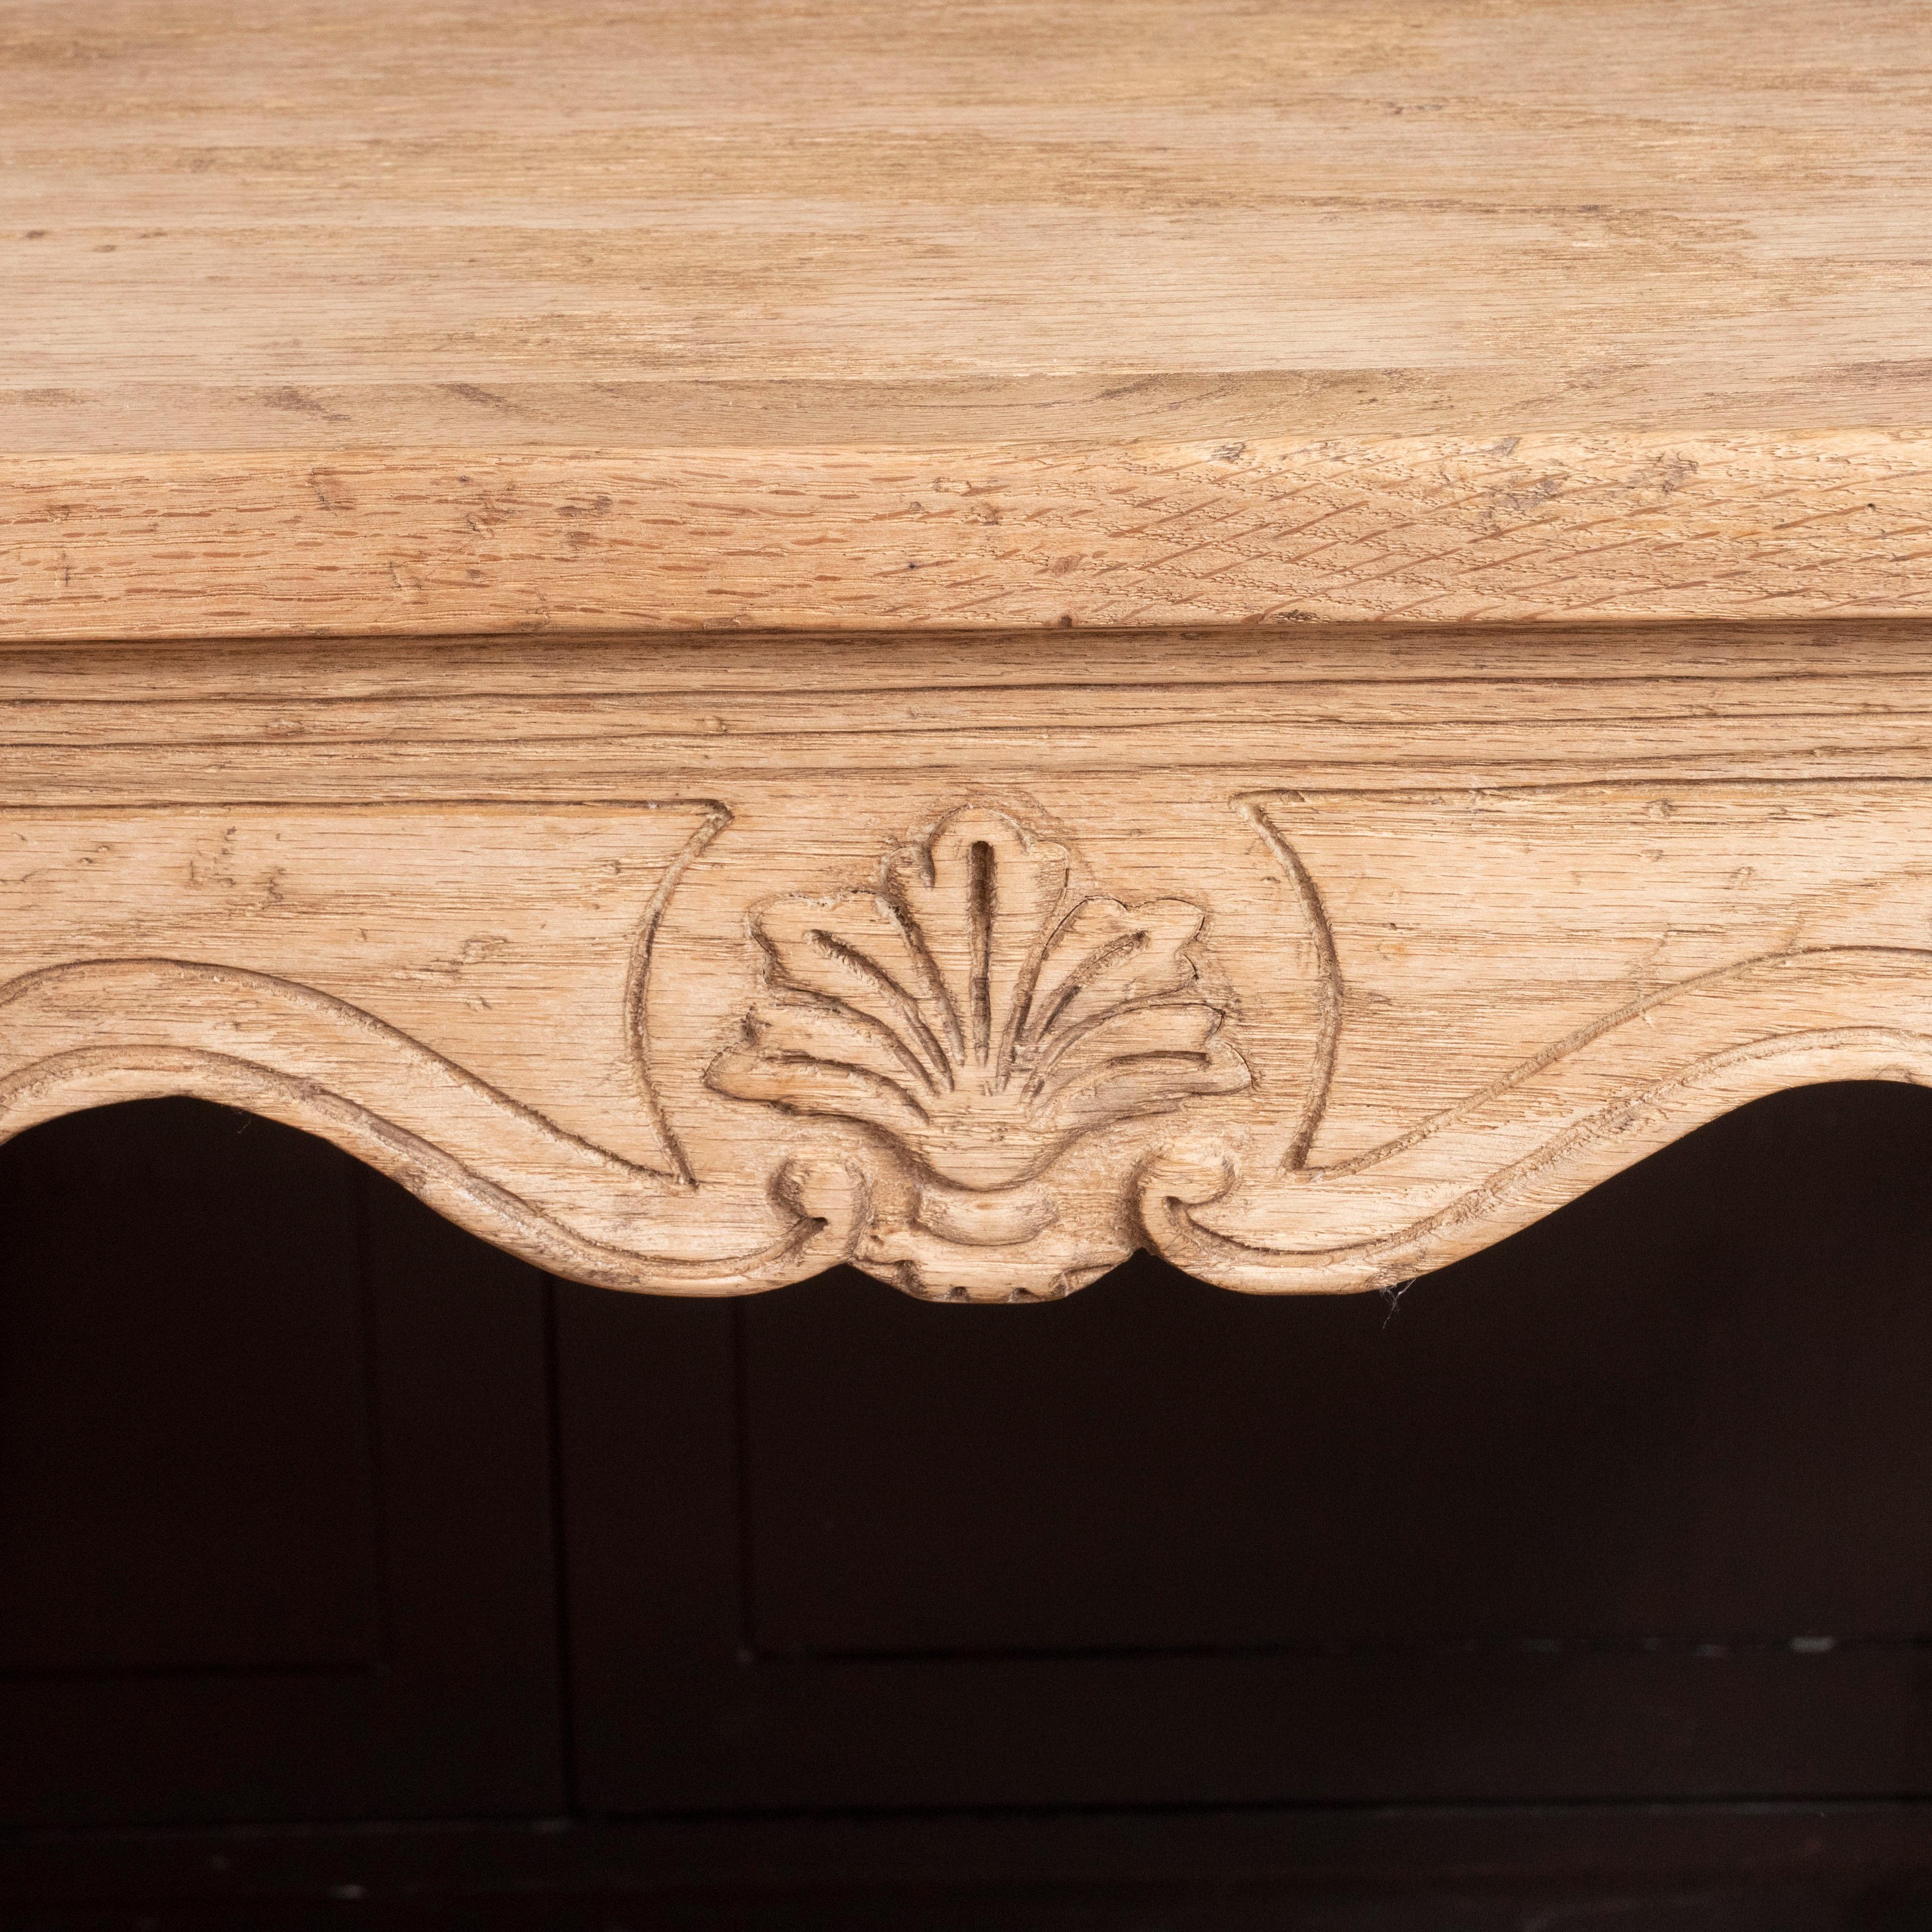 A Louis XV style bleached oak table with beautiful wood carving on the base and legs. Elegant, yet understated, the bleached finish gives a fresh look to a traditional piece.